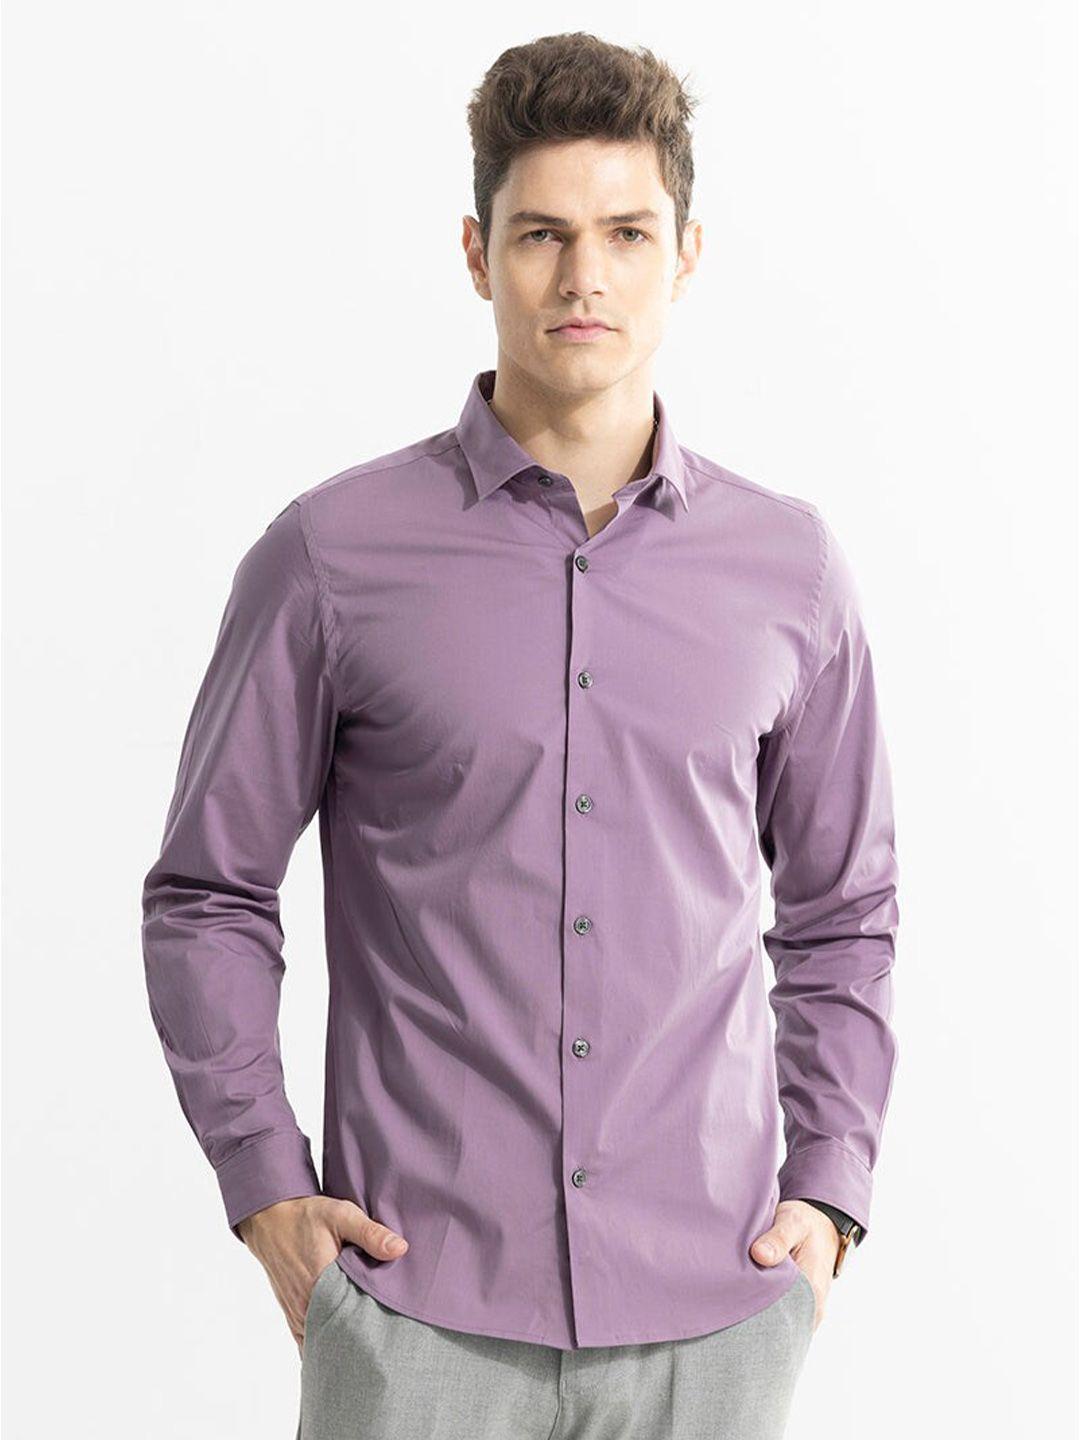 Snitch Purple Classic Slim Fit Spread Collar Long Sleeves Cotton Casual Shirt